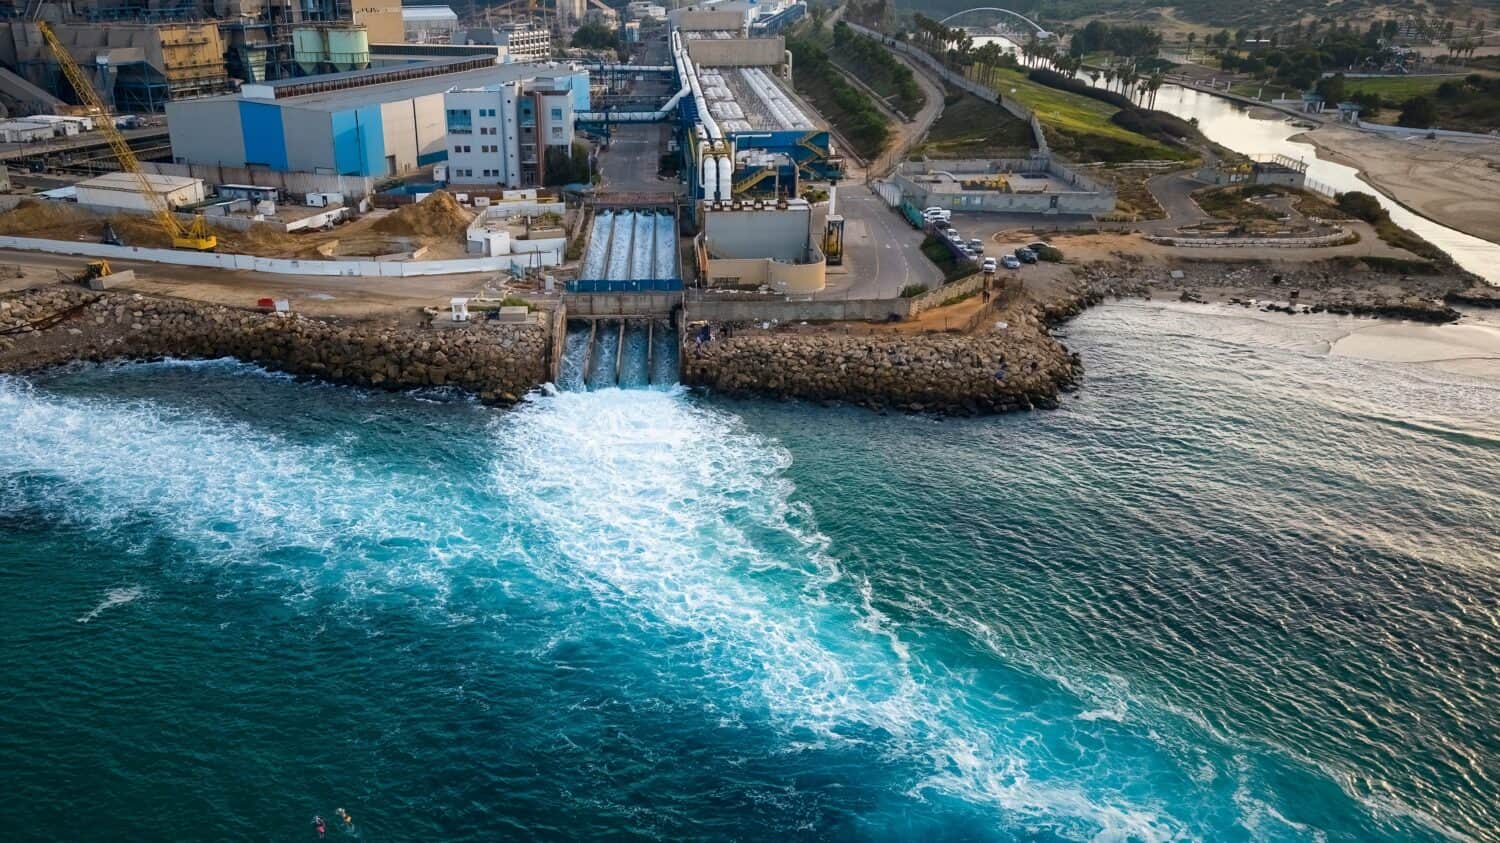 Top view The largest water desalination facility in the world, Hadera Israel by Luciano Santandreu